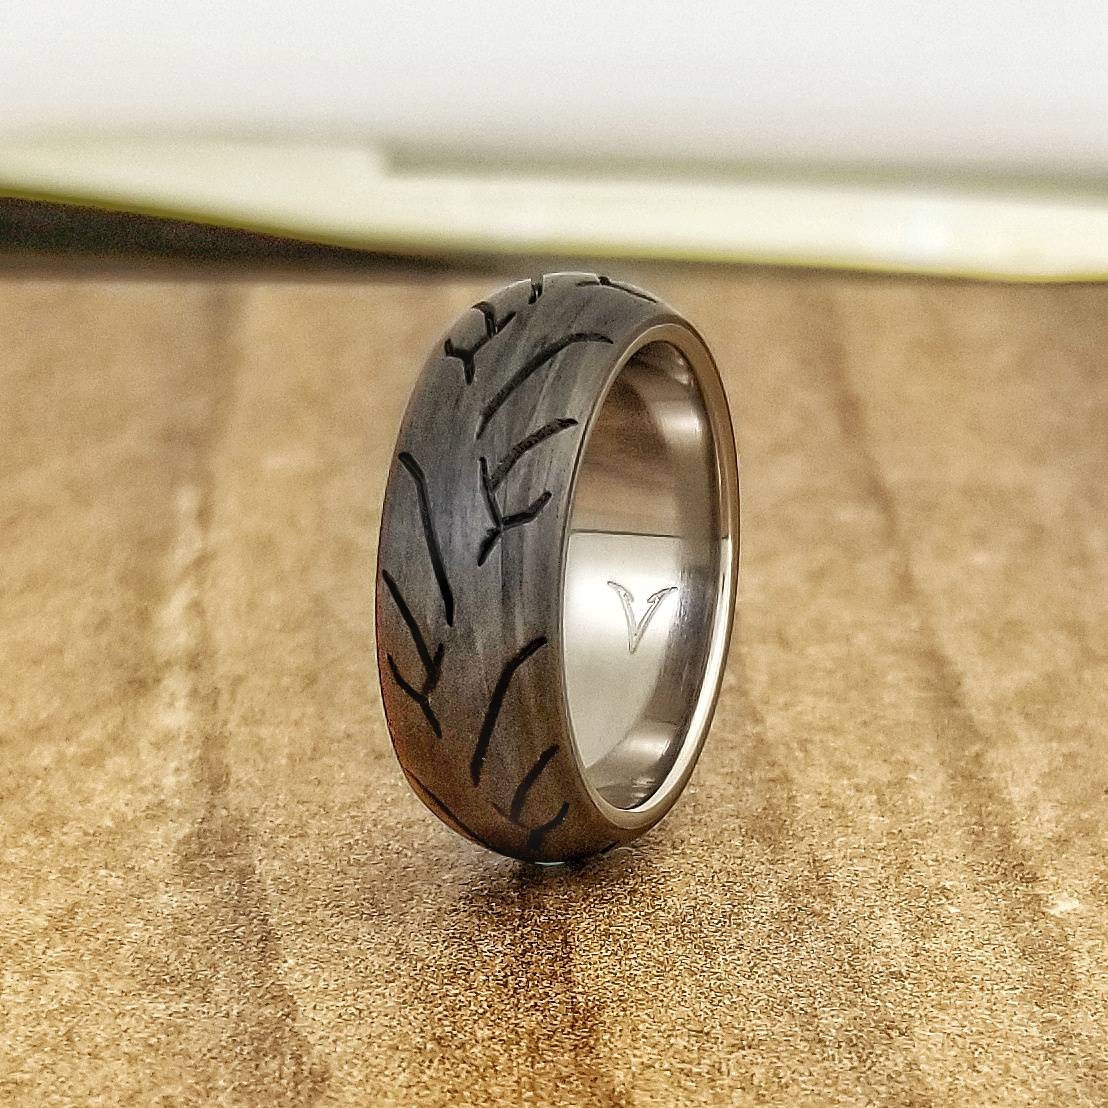 Stainless Steel Carved Motorcycle Tire Tread Wedding Ring Brushed/matt 8mm  - Etsy